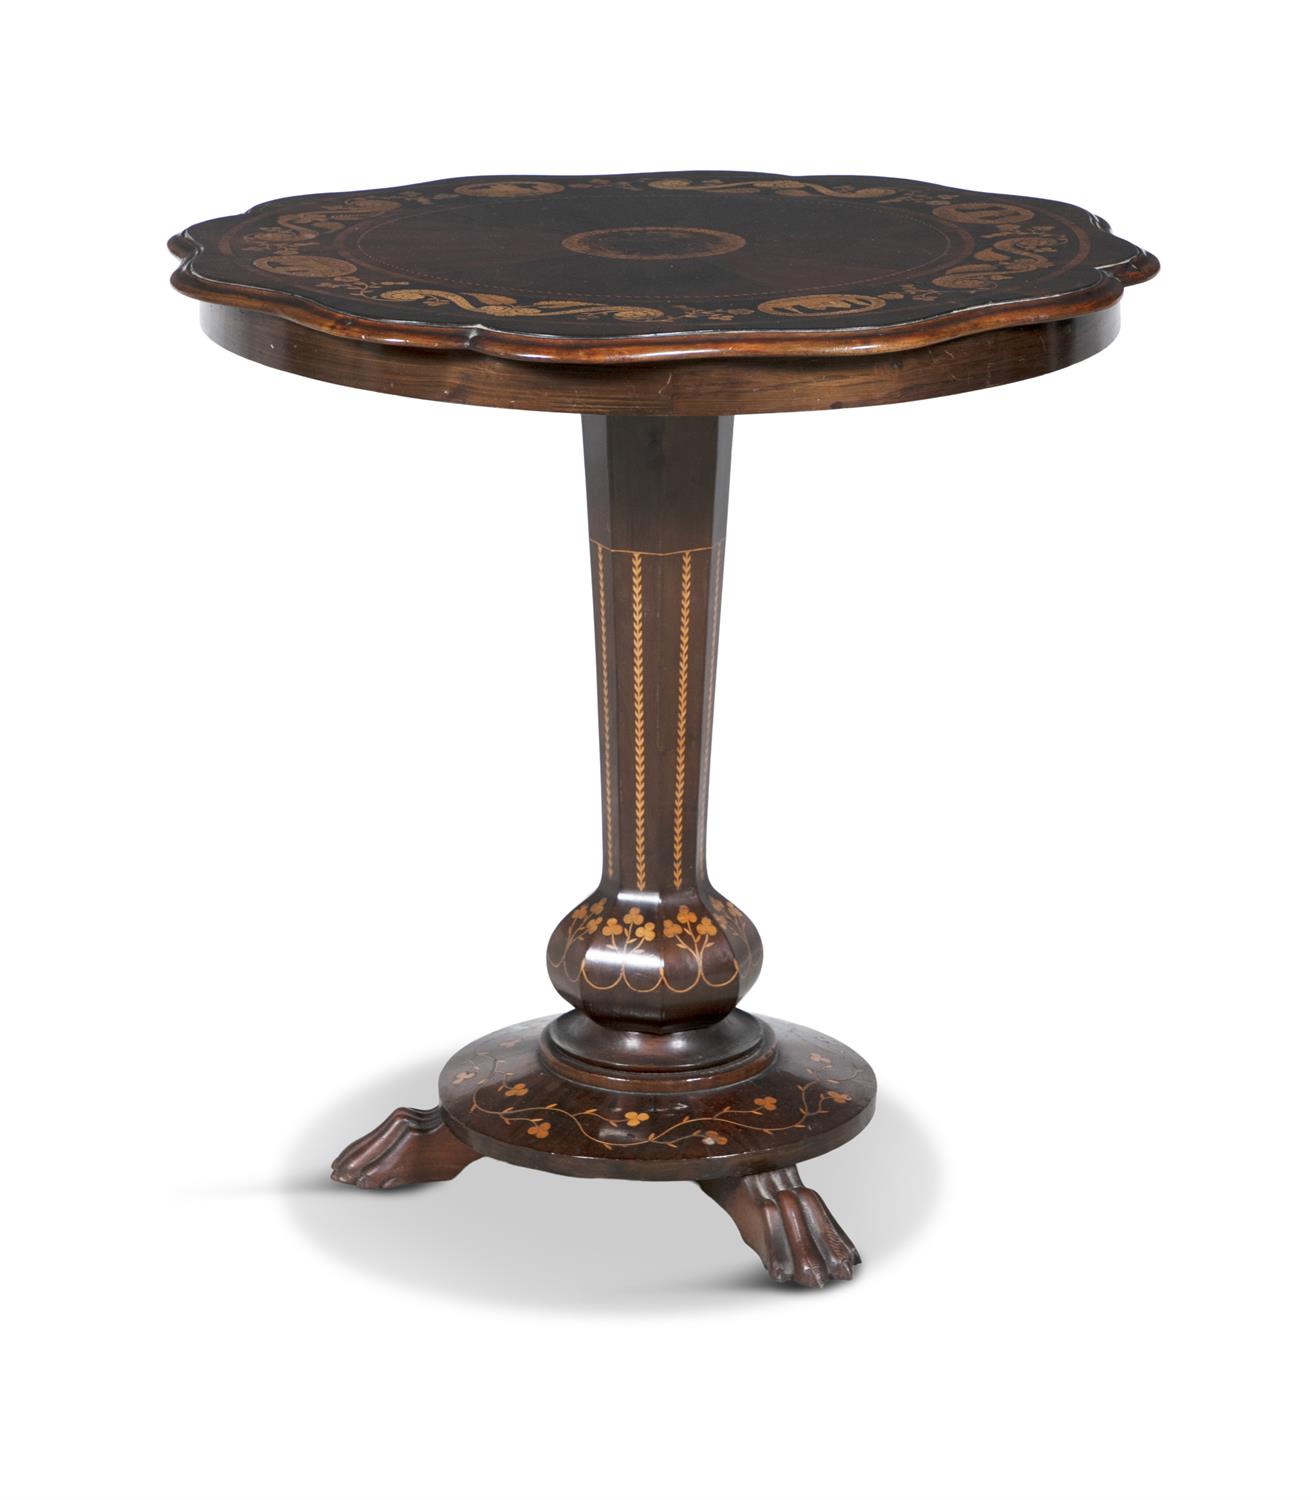 A VICTORIAN INLAID ARBUTUS KILLARNEY WORK CENTRE TABLE, the shaped circular top decorated with a